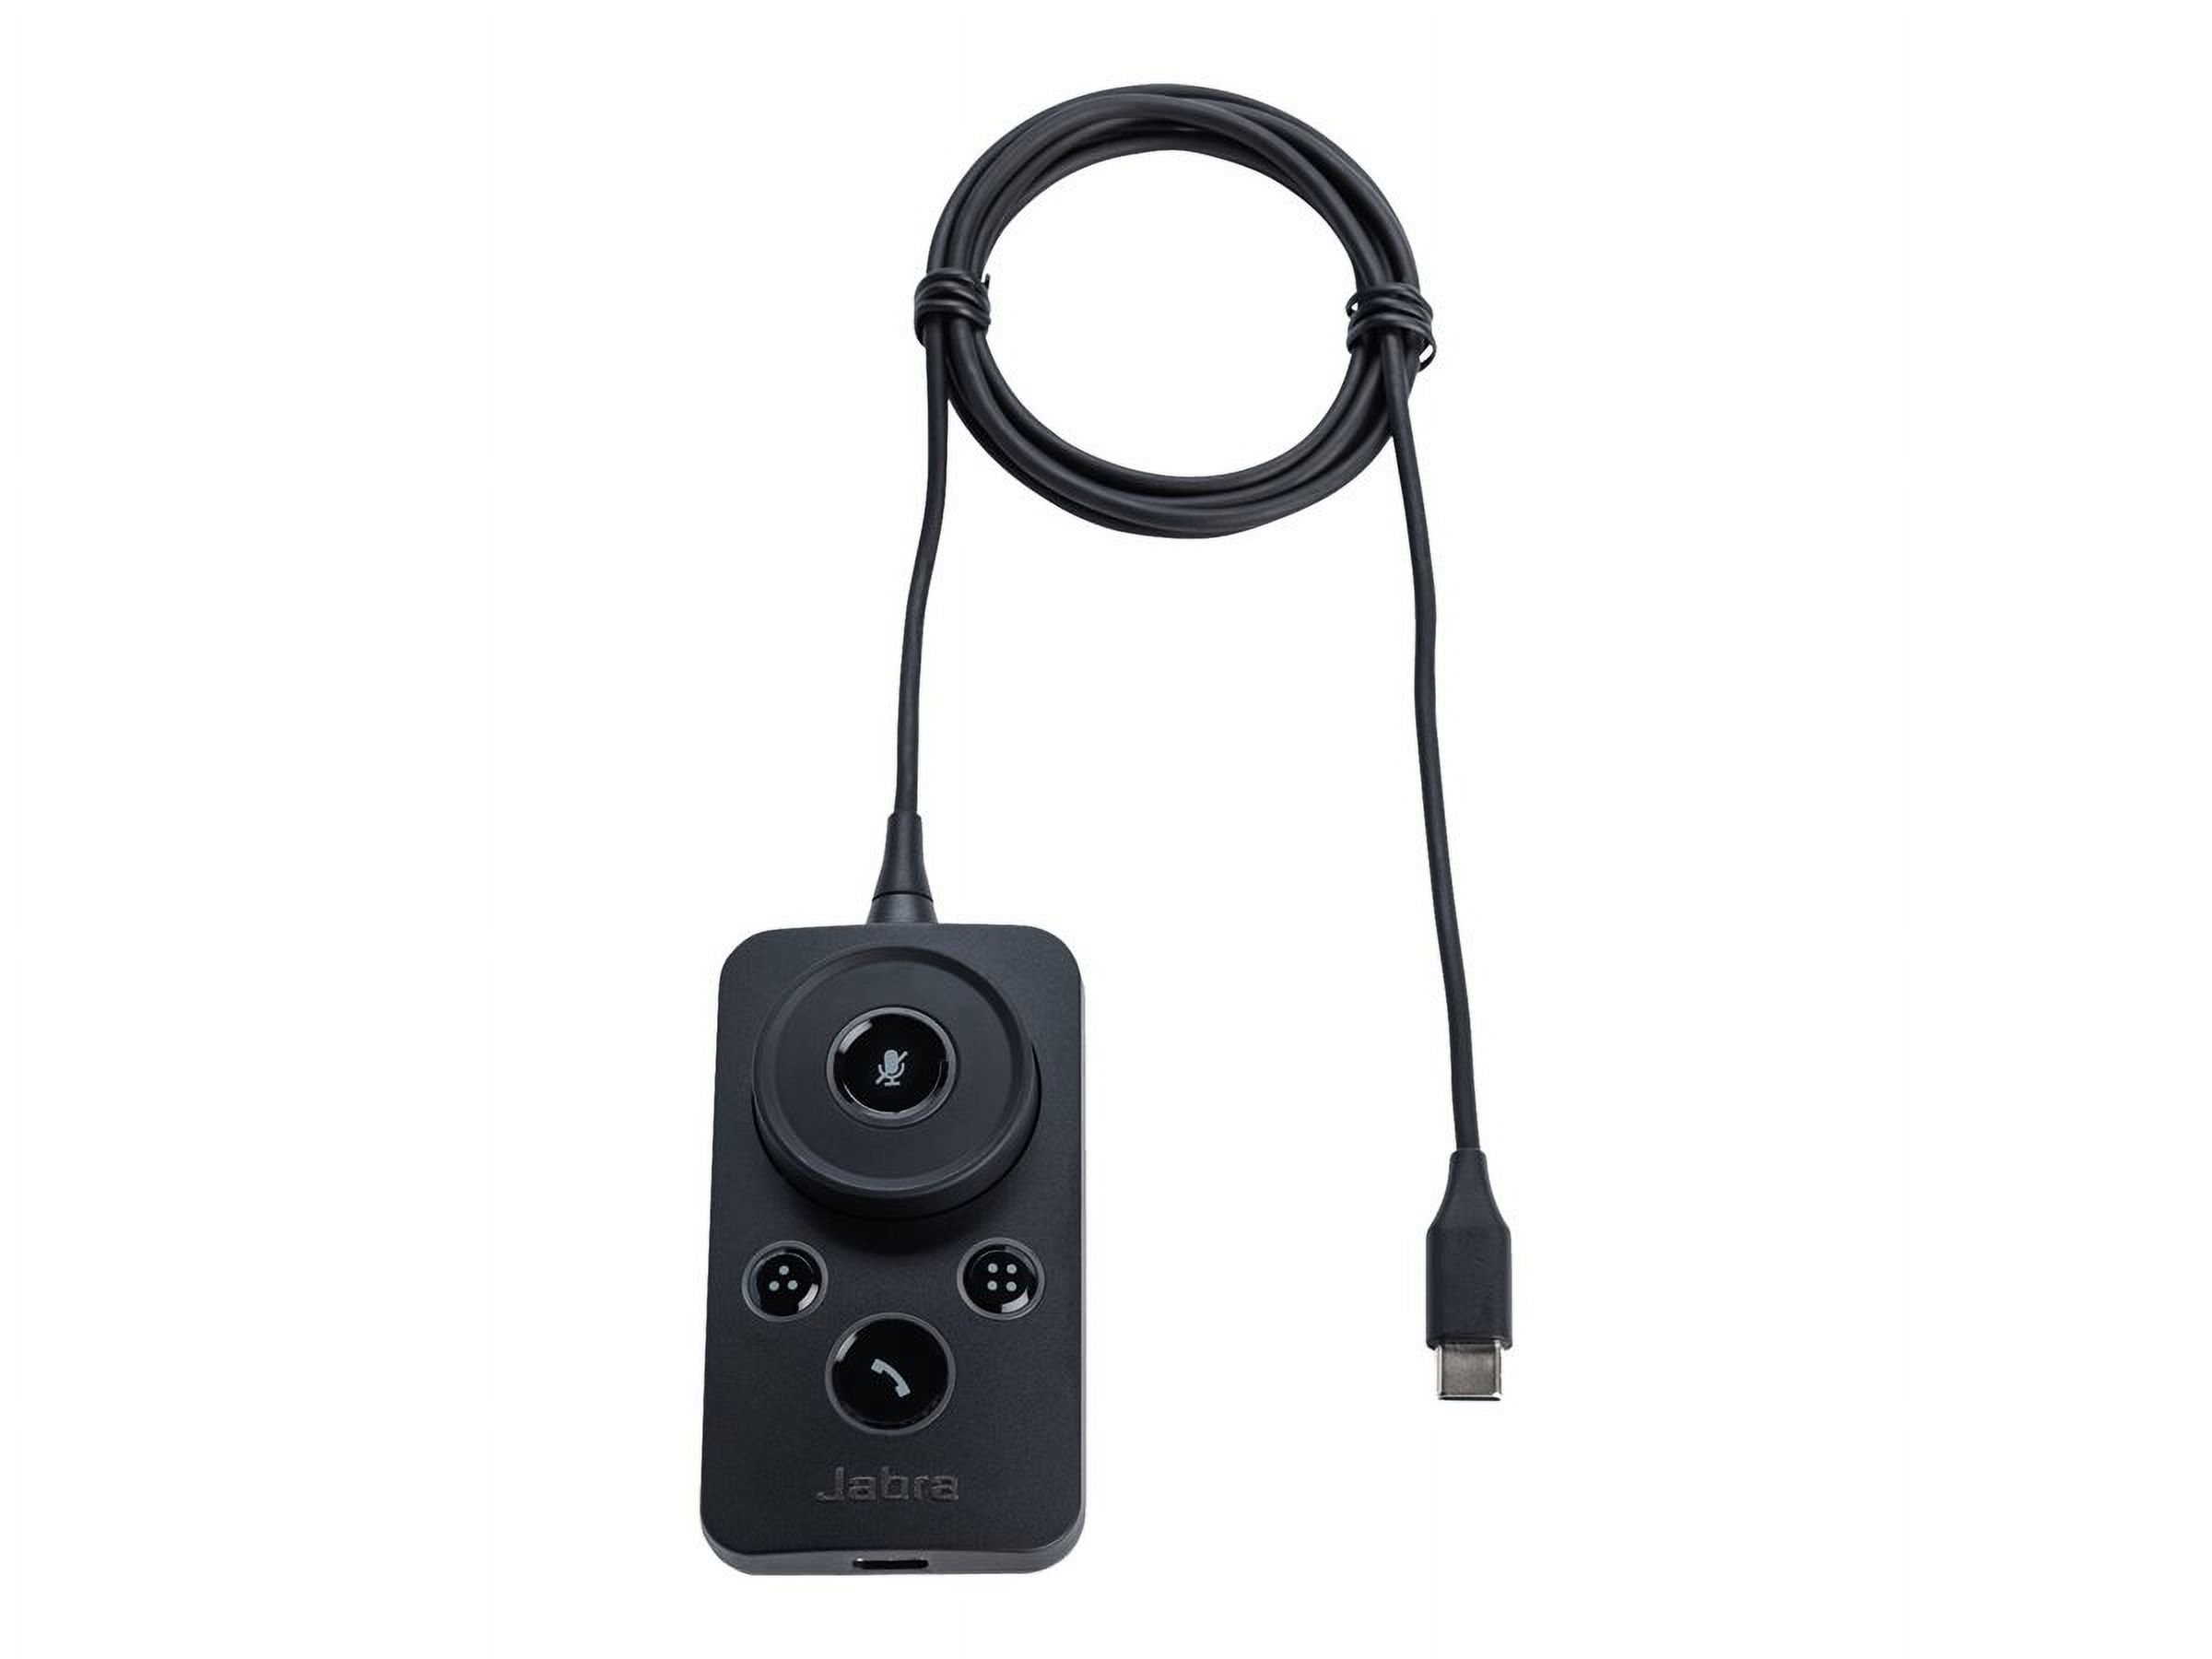 Jabra Engage Link MS - Remote control - cable - for Engage 50 Mono, 50 Stereo, 65 Mono, 65 Stereo, 75 Mono, 75 Stereo - image 1 of 2